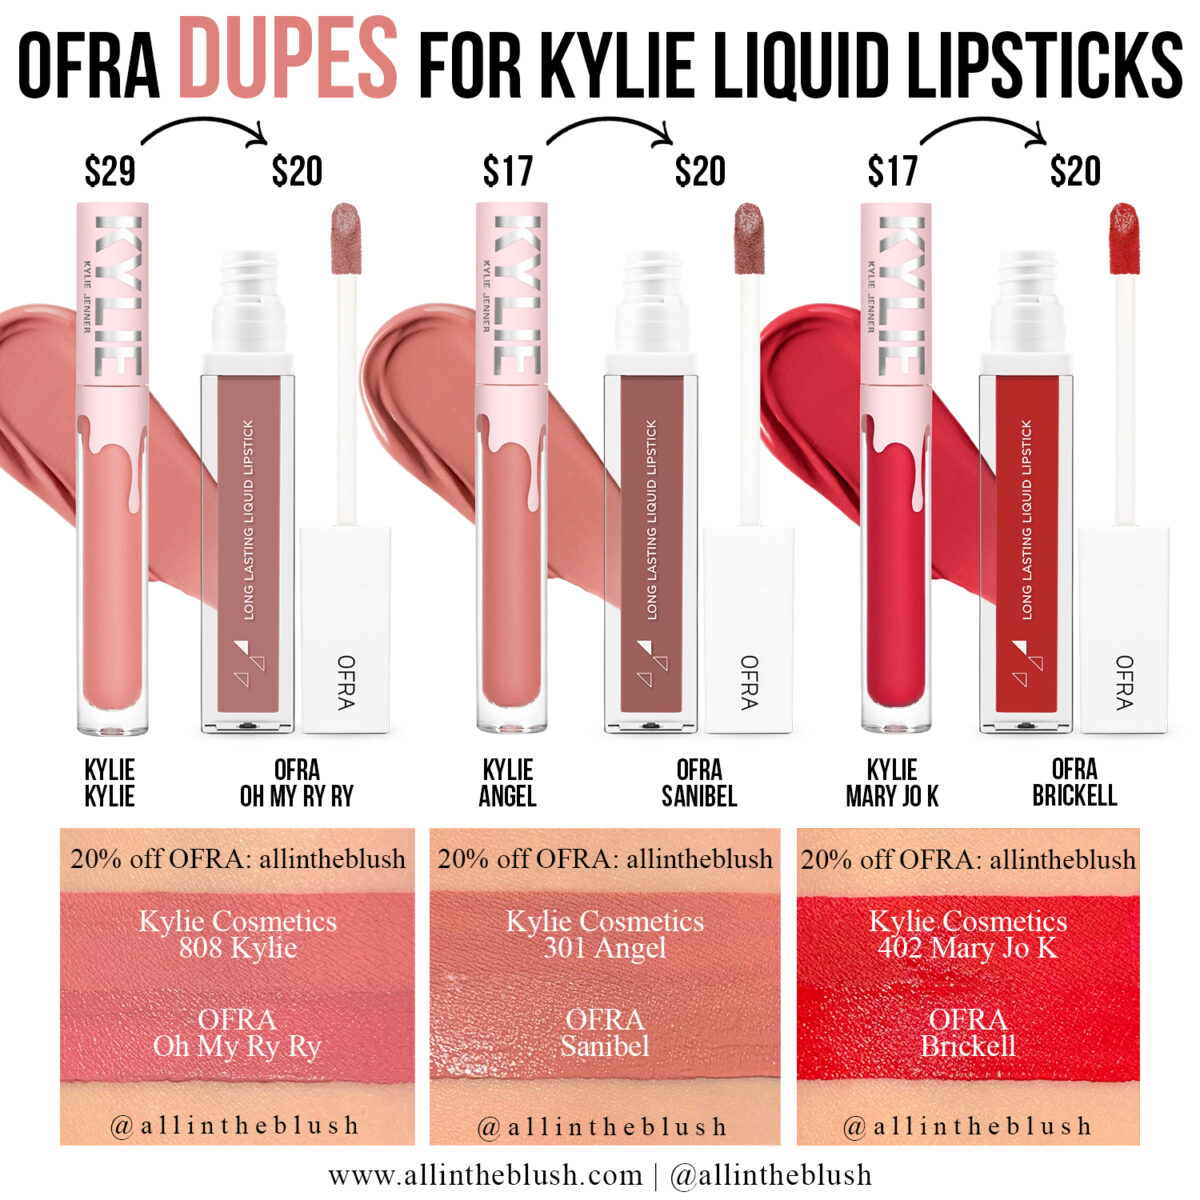 OFRA Dupes for Kylie Cosmetics Liquid Lipsticks (Rebranded Shades)